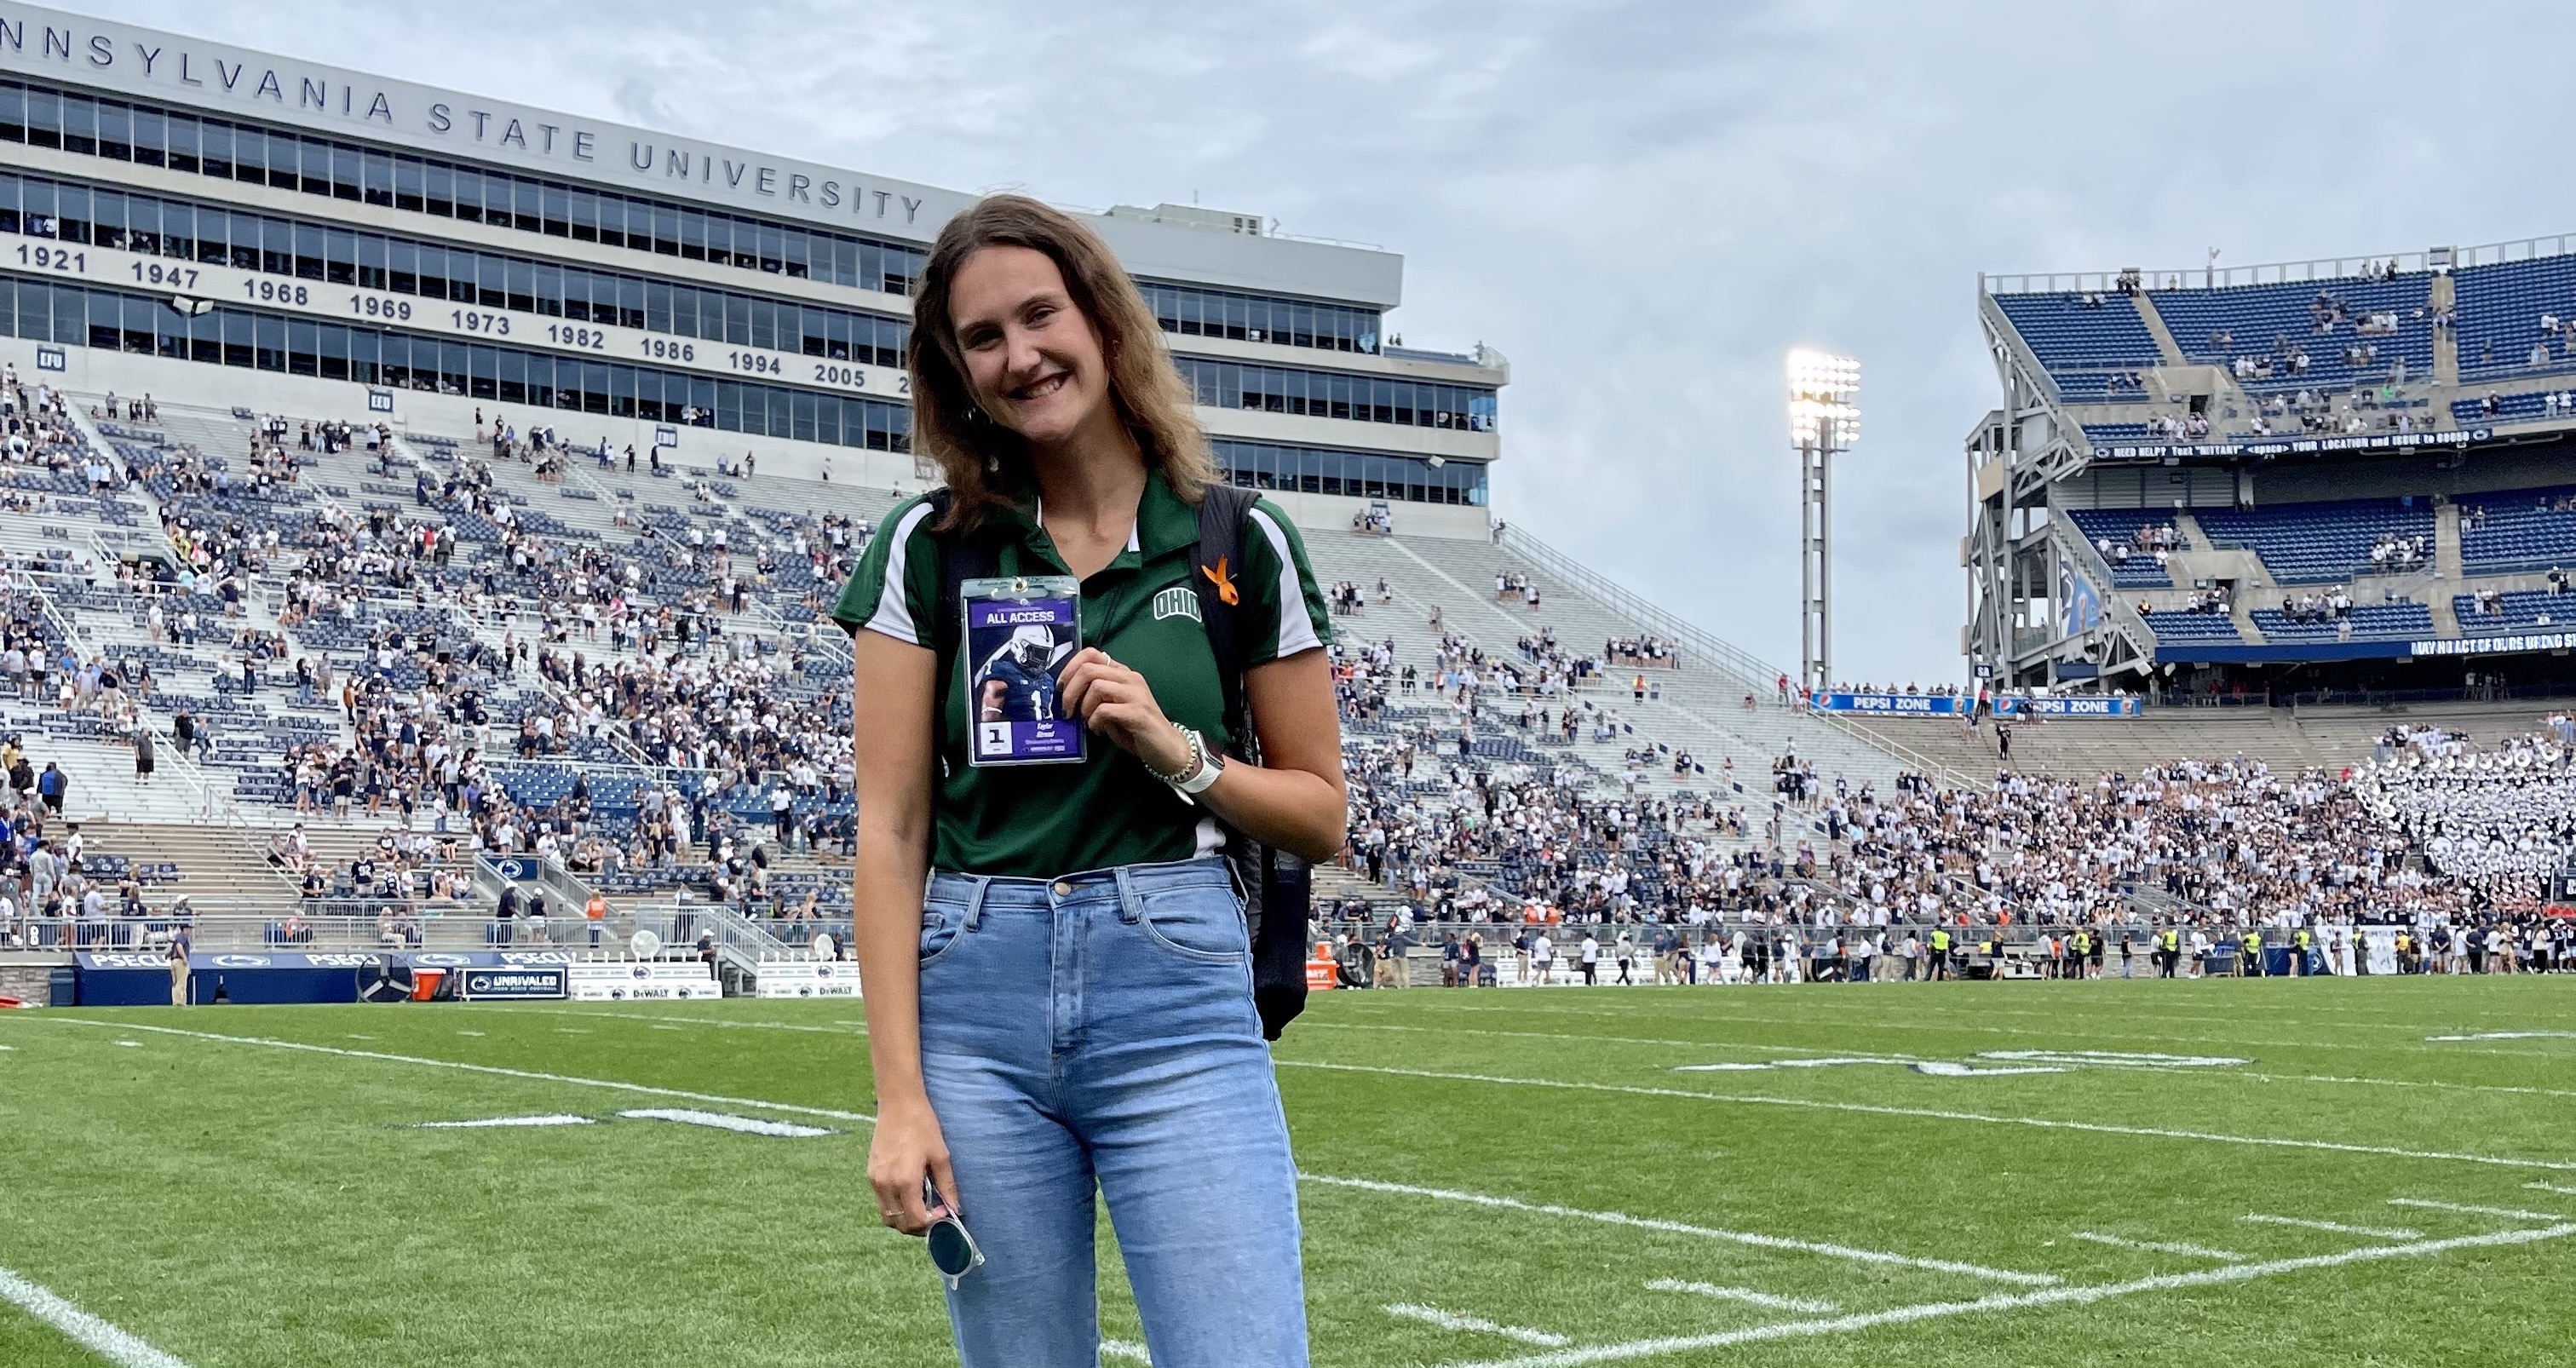 Graduate student Taylor Strnad attends an away game with the Ohio University football team. 